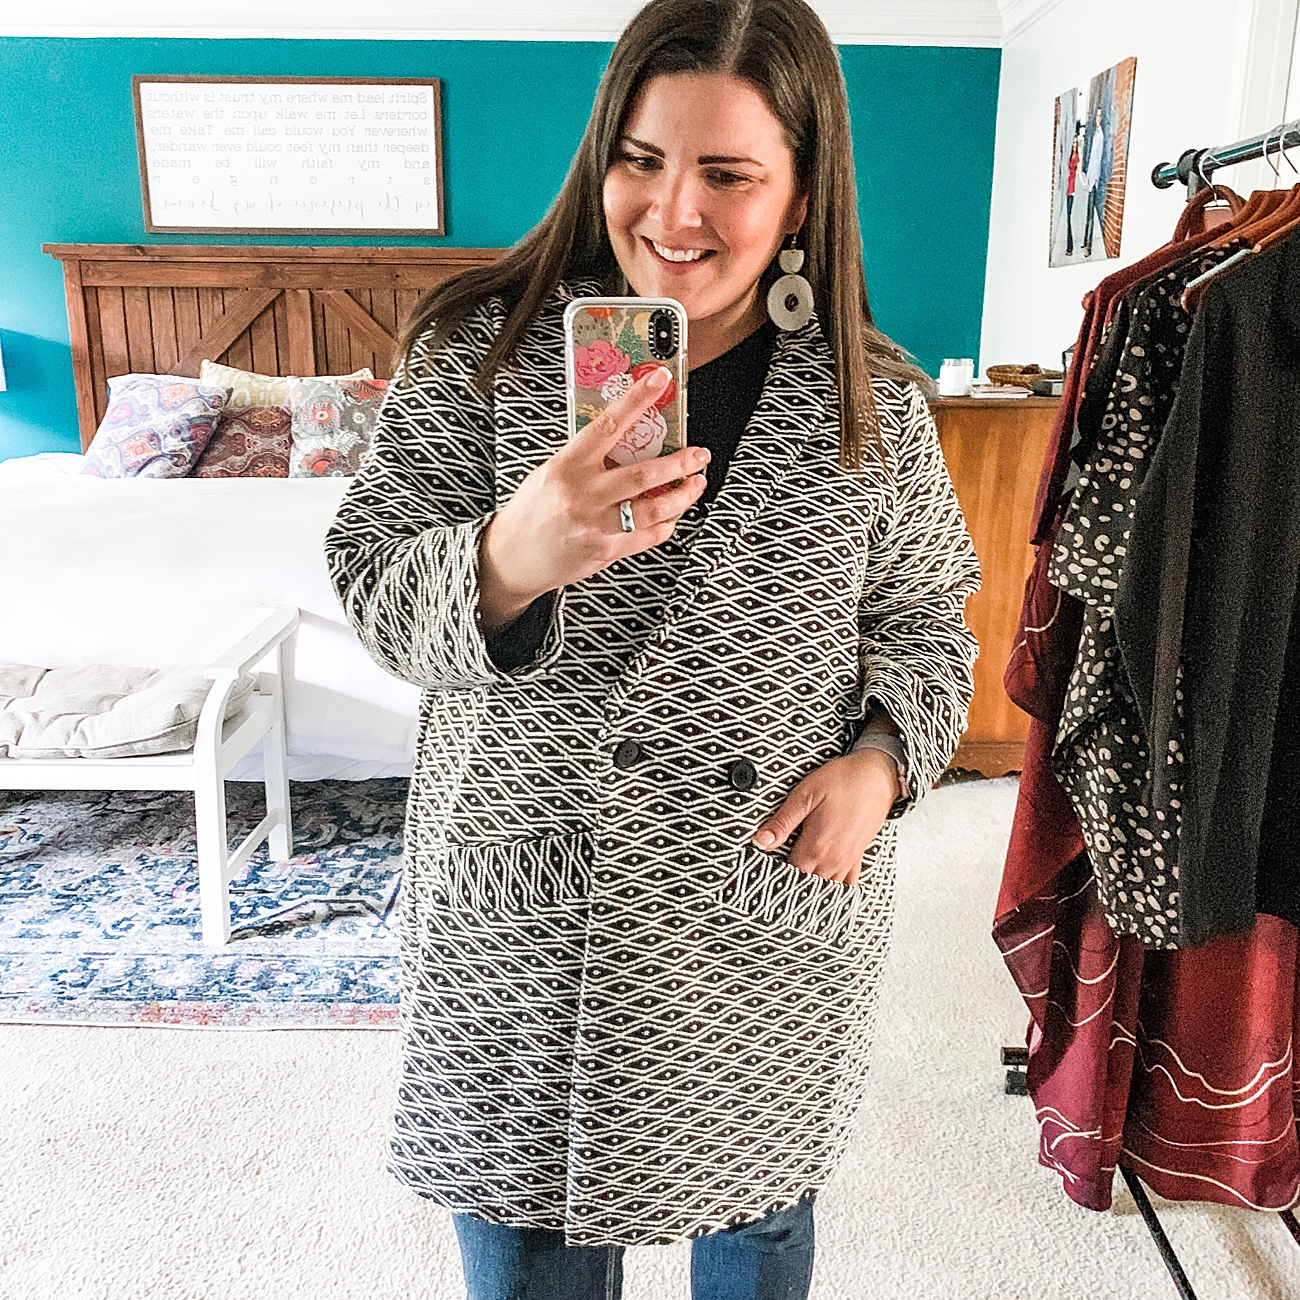 Sseko Designs Fall 2019 Sojourner Collection | Review + Try-On | Fair Trade Fashion #fairtradestyle #ethicalfashion http://www.ssekodesigns.com/mollystillman (13)